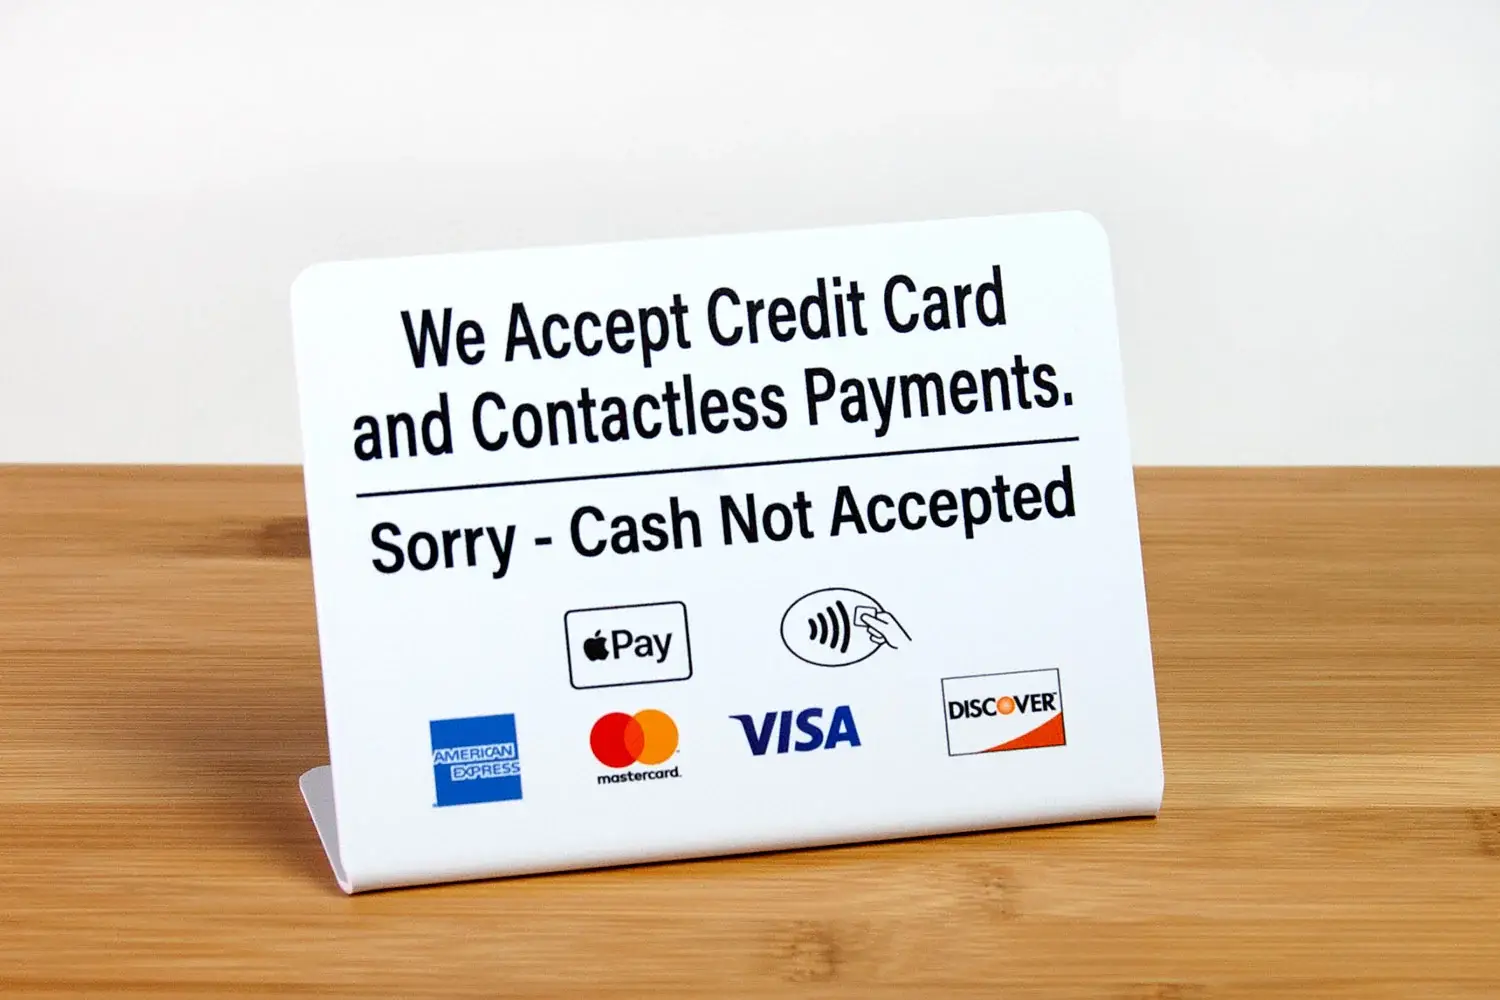 A "cash not accepted" sign